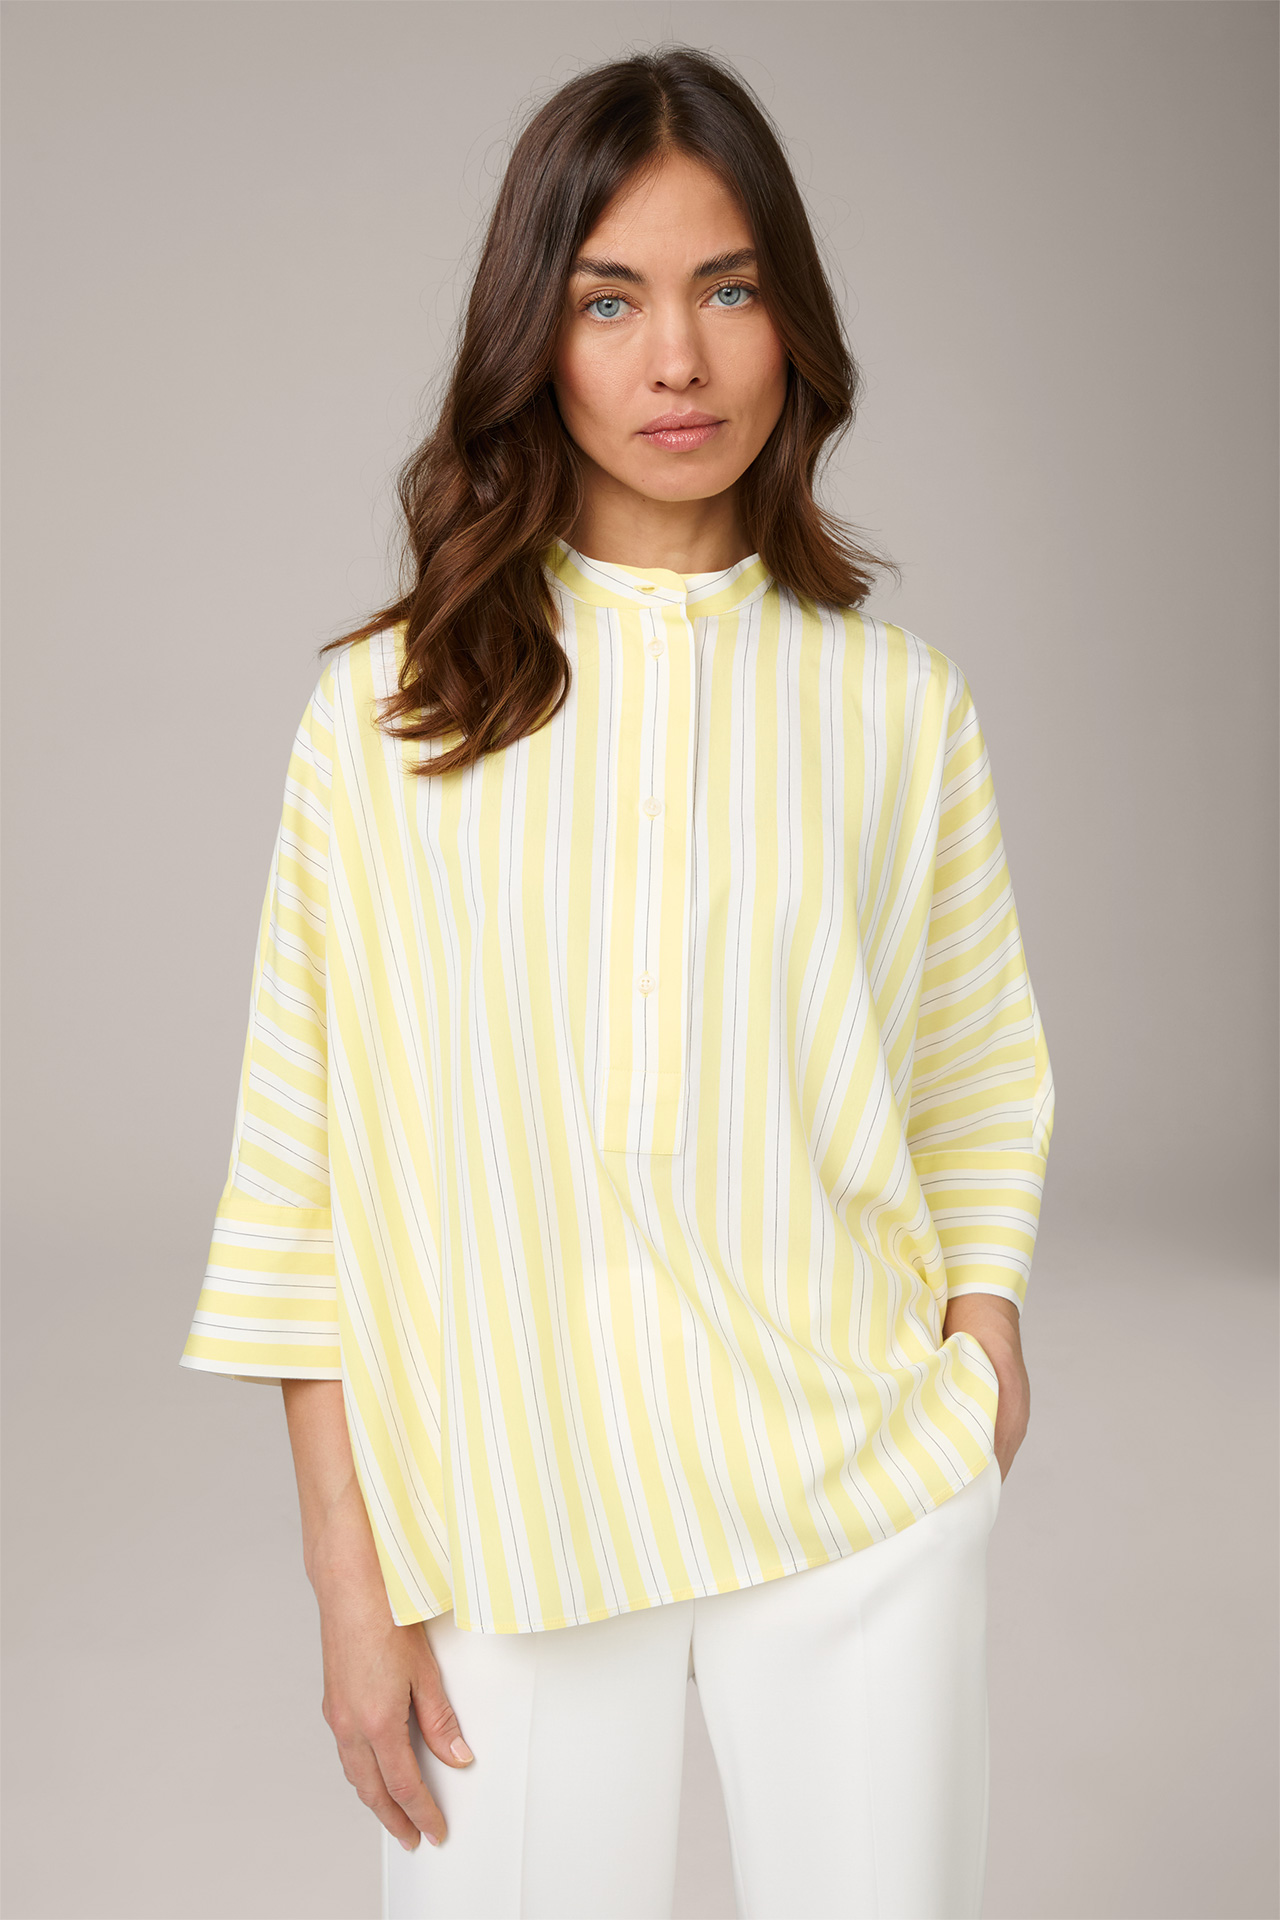 Viscose Silk Blend Cape Blouse in White and Yellow Striped